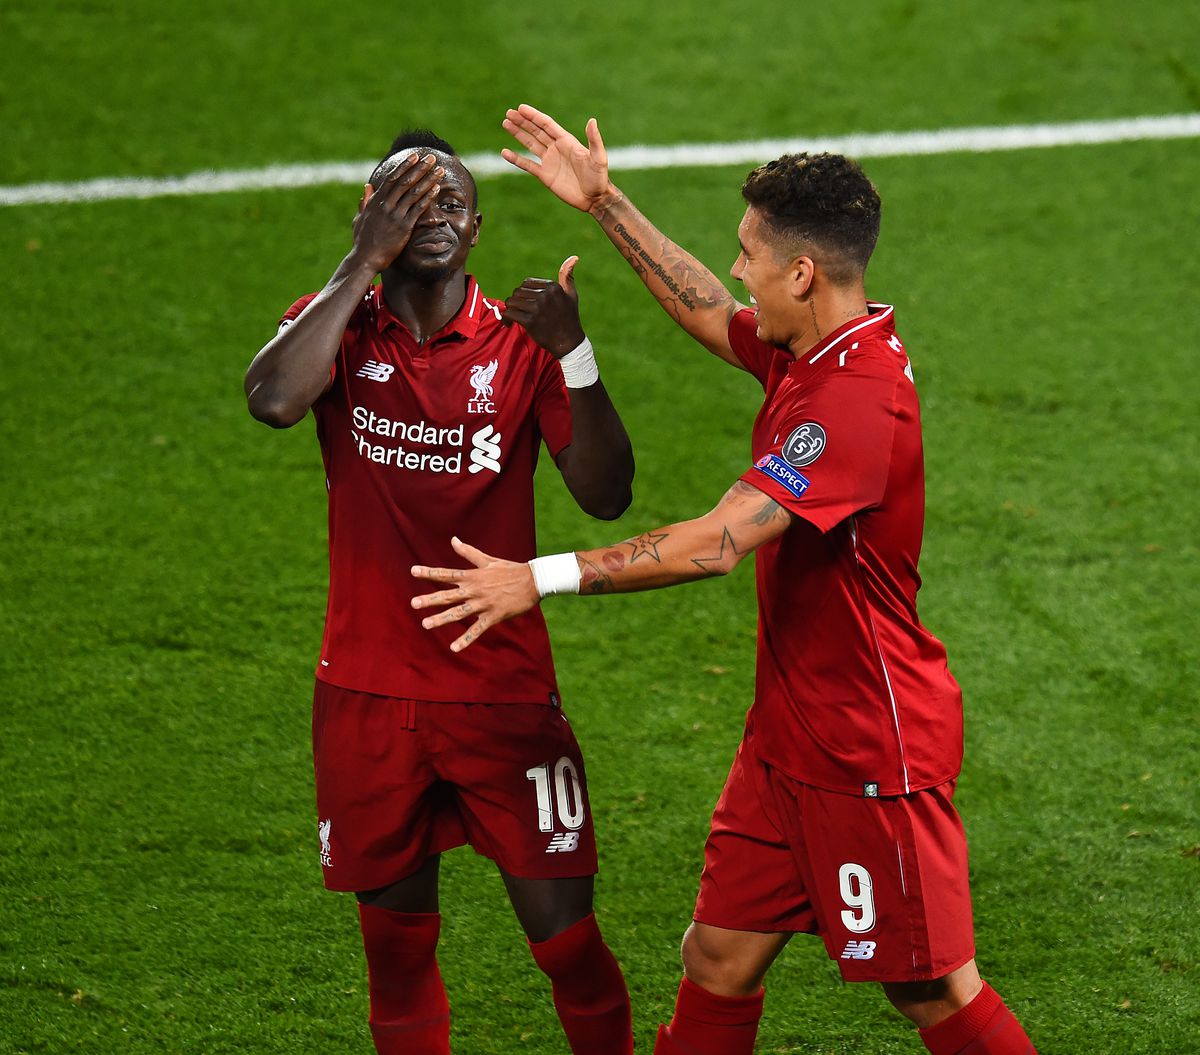 Mané points at the man himself as he one-eye celebrates in homage. 